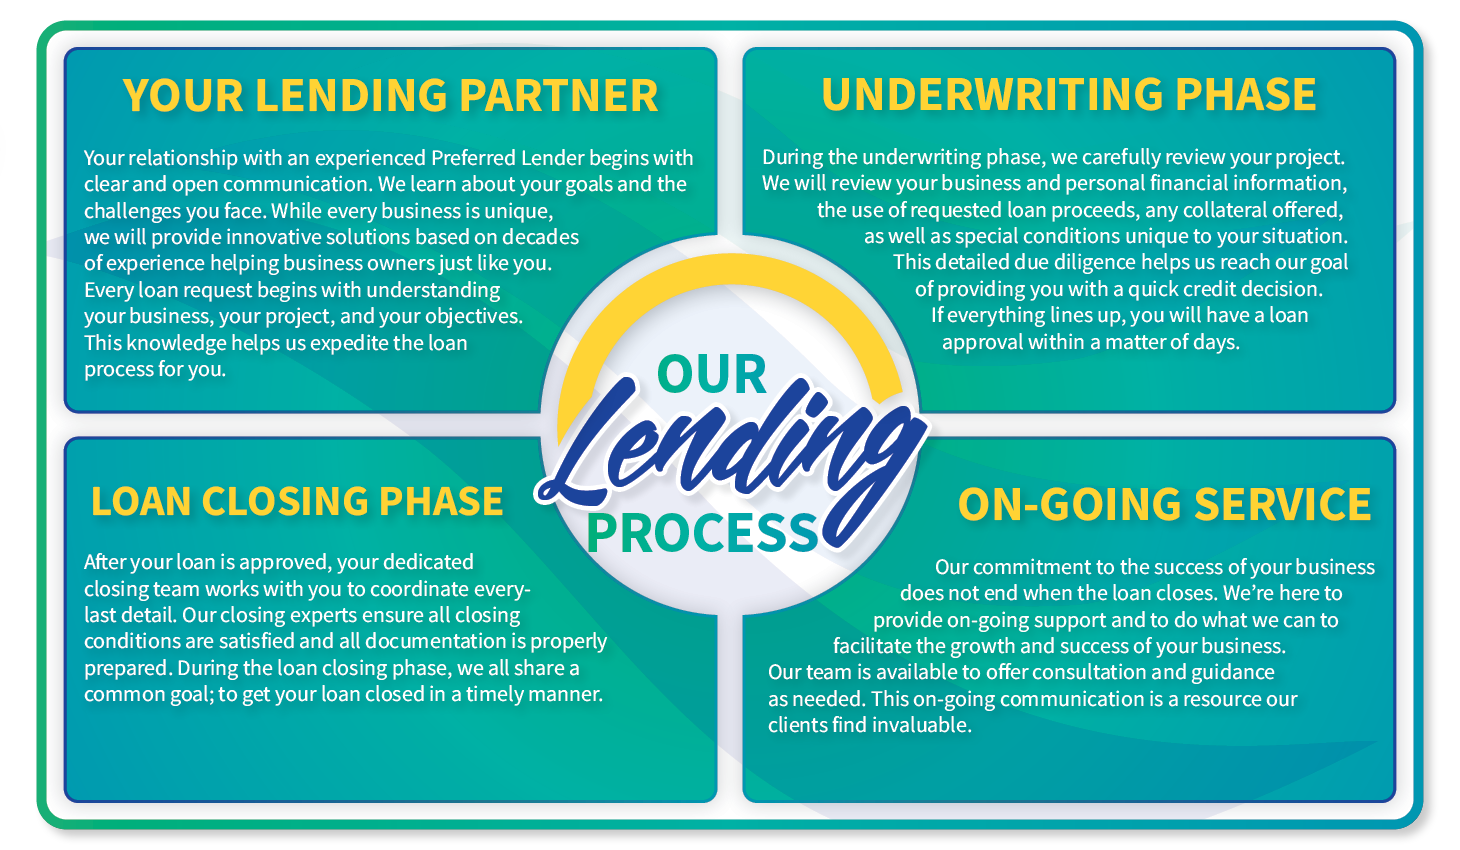 Our Lending Process. Underwriting, Loan Closing & Ongoing Service